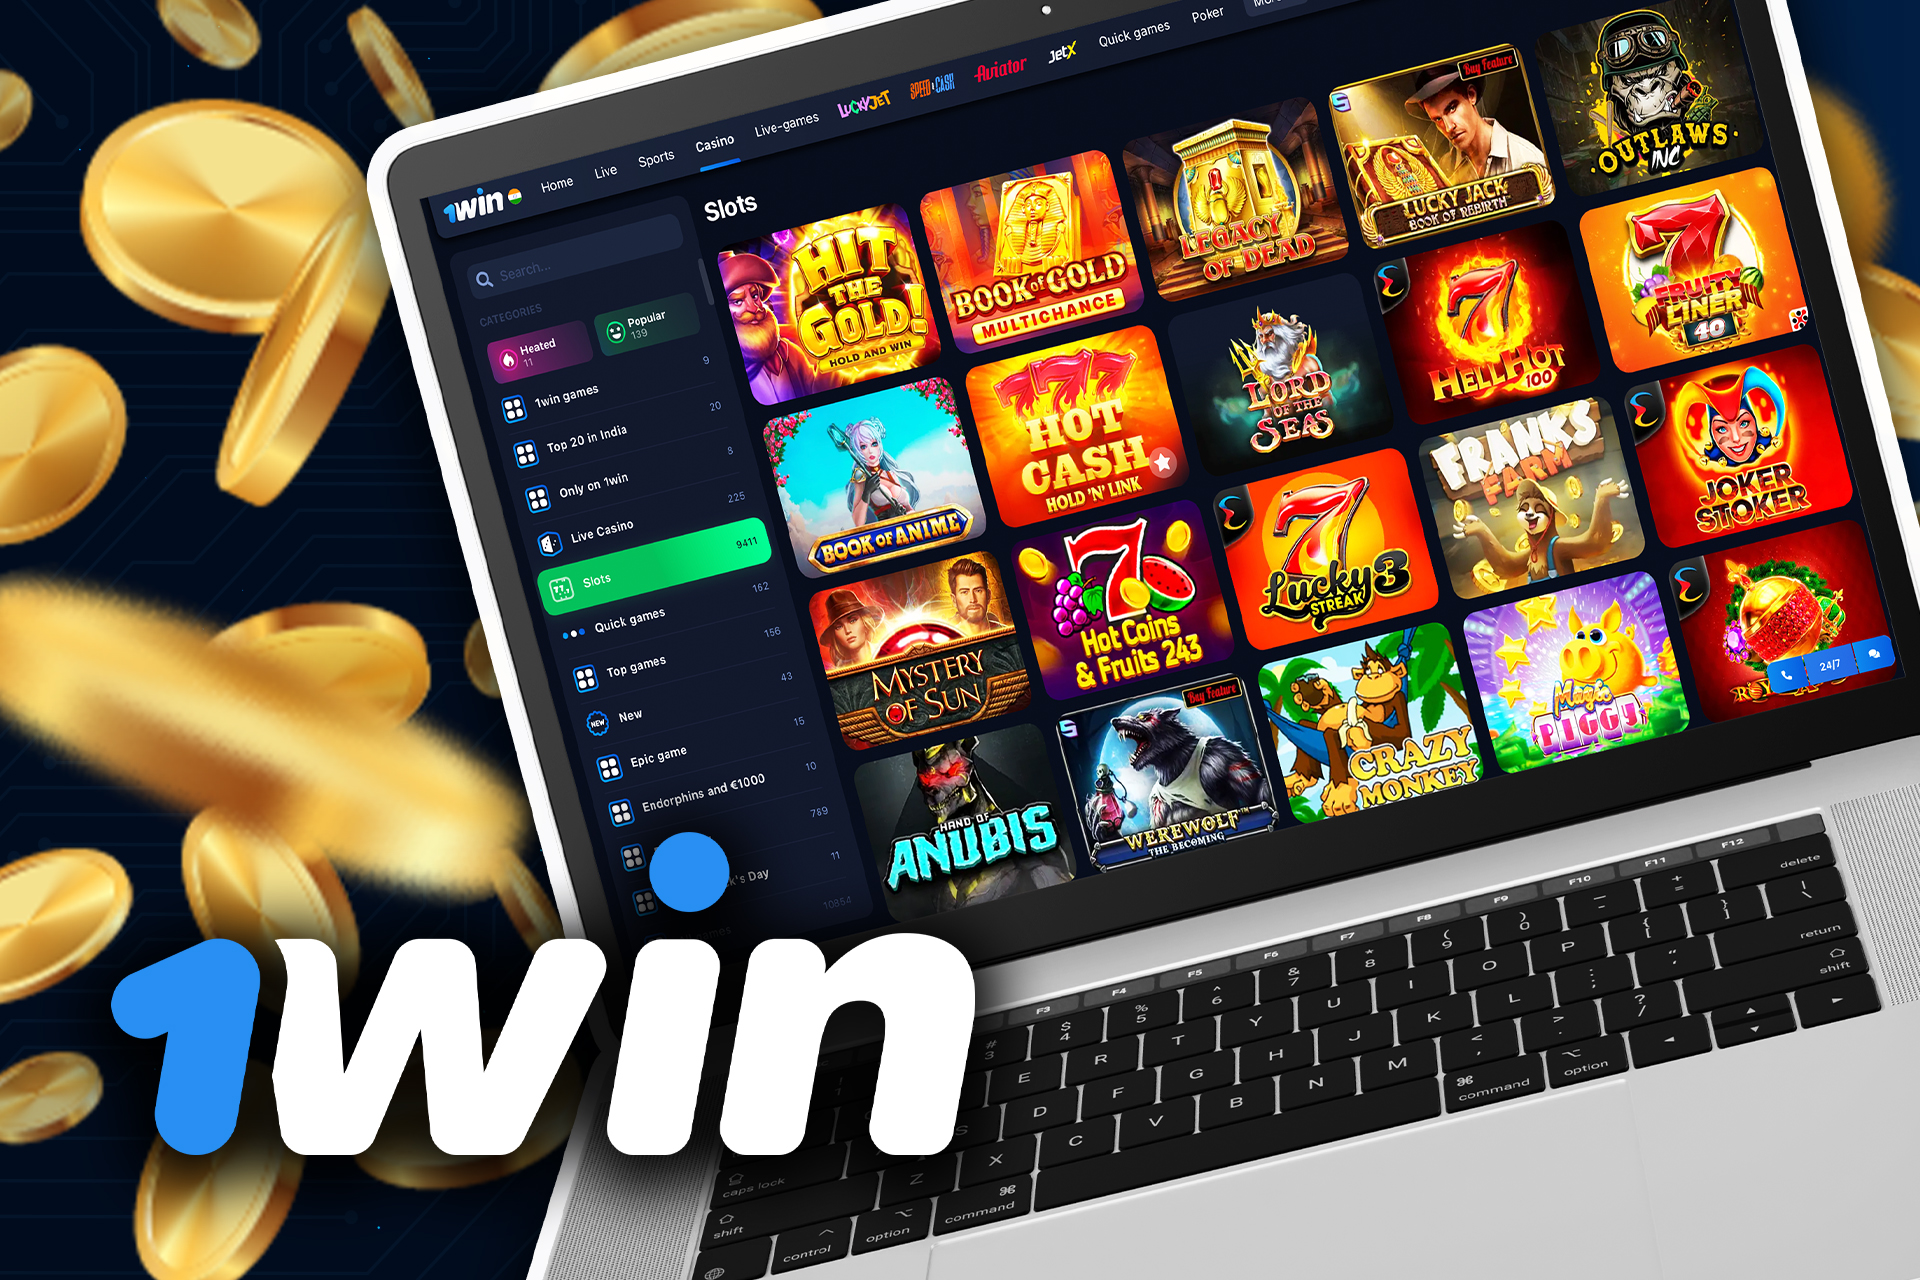 There are lots of slots from the well-known providers on 1win.